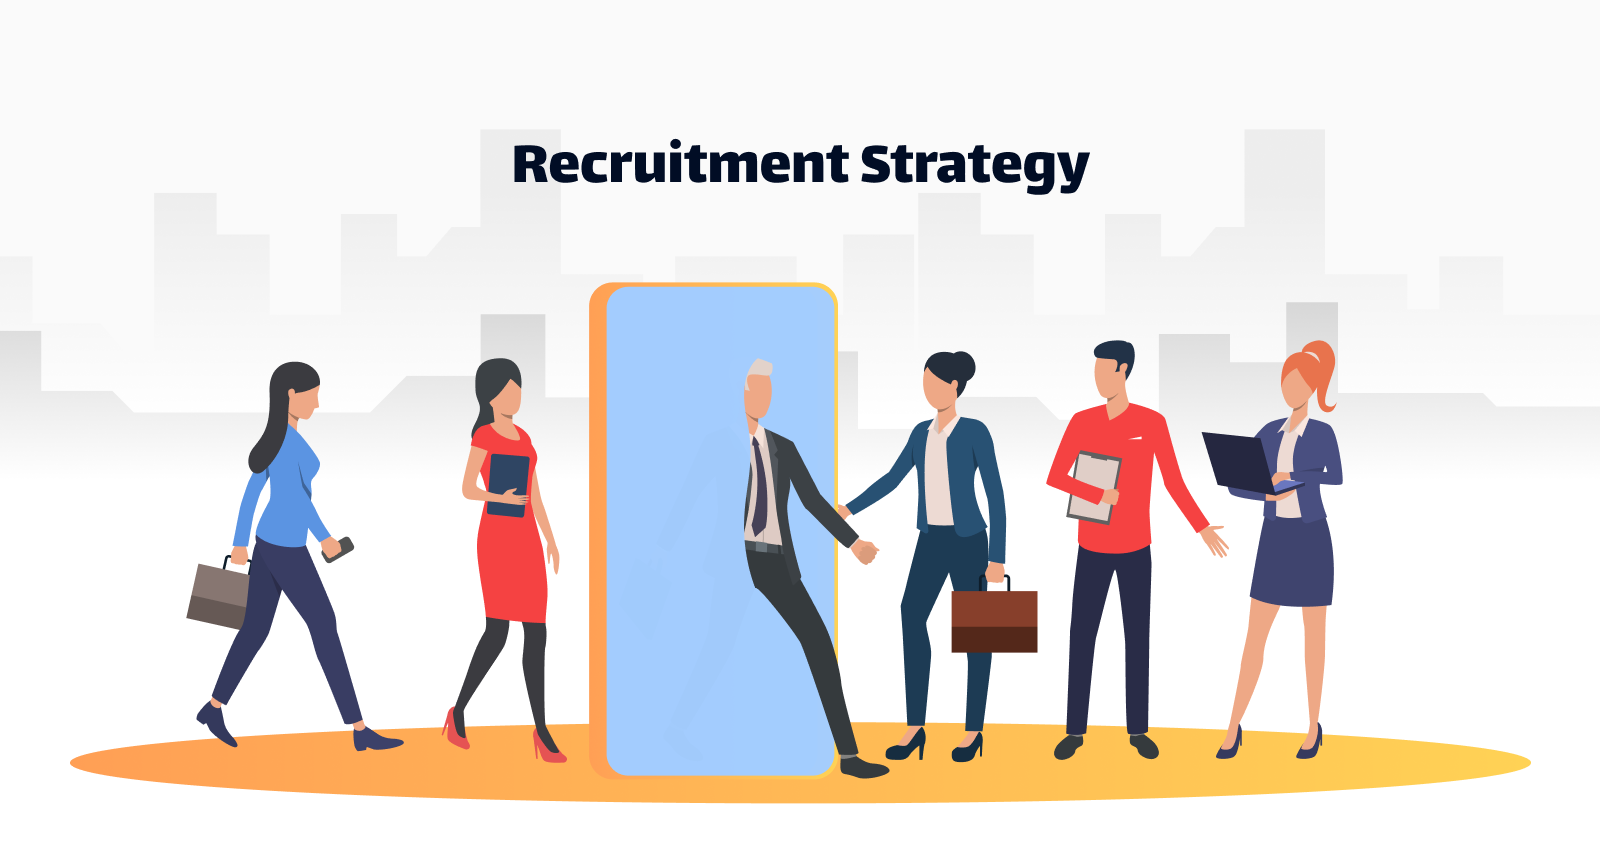 Hiring Process, Hiring Strategy, Recruitment steps, Principles to scale up hiring process, Steps in the hiring process, Hiring procedure